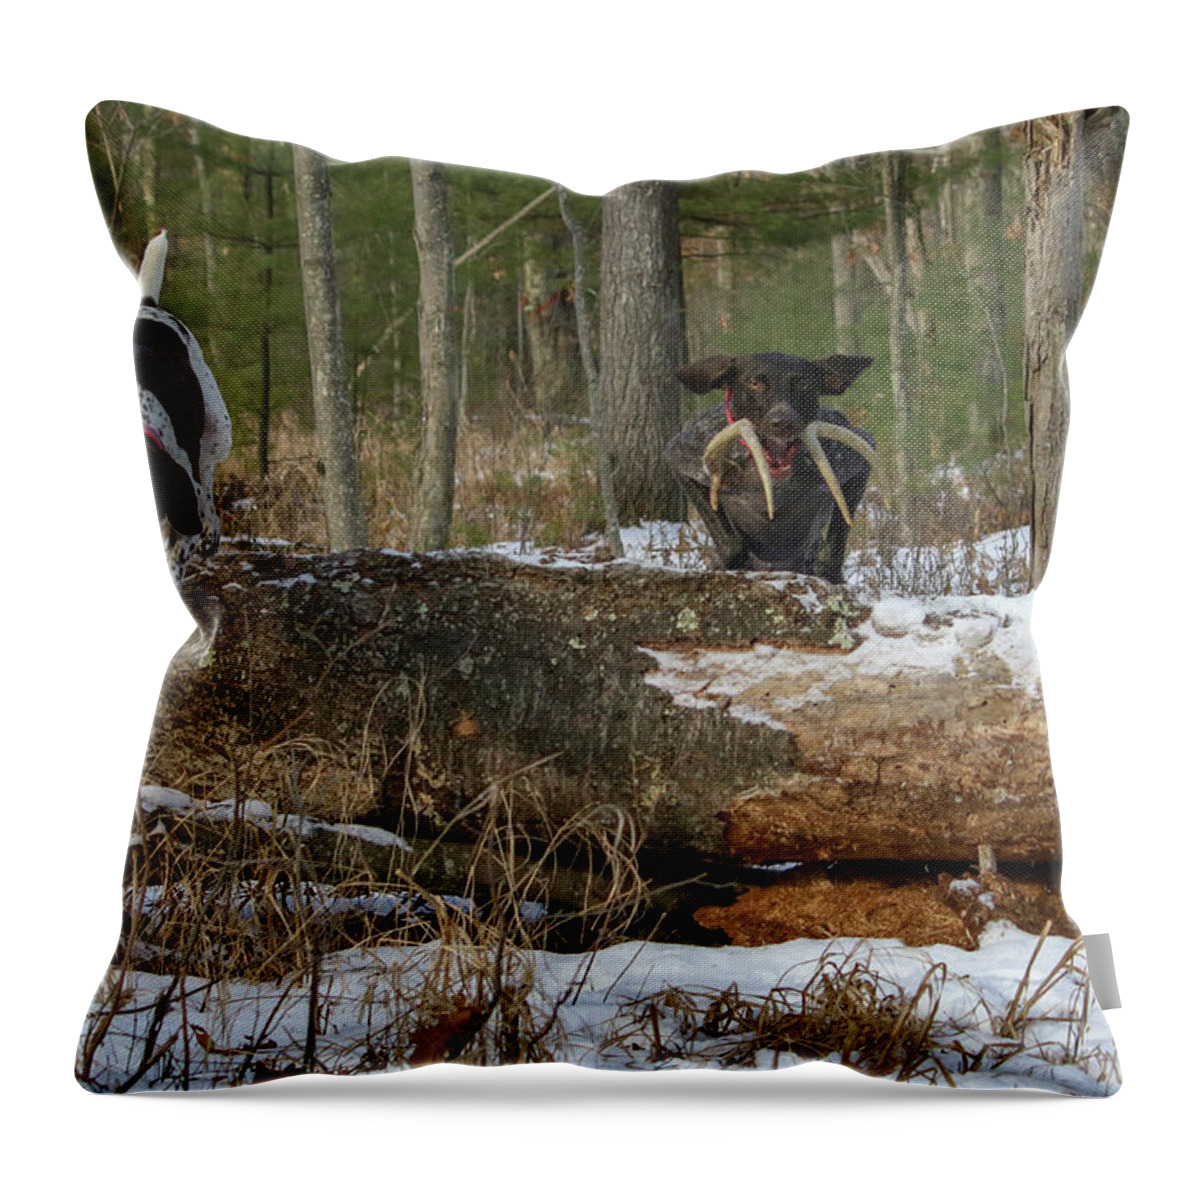 Gsp Throw Pillow featuring the photograph Over the Log by Brook Burling